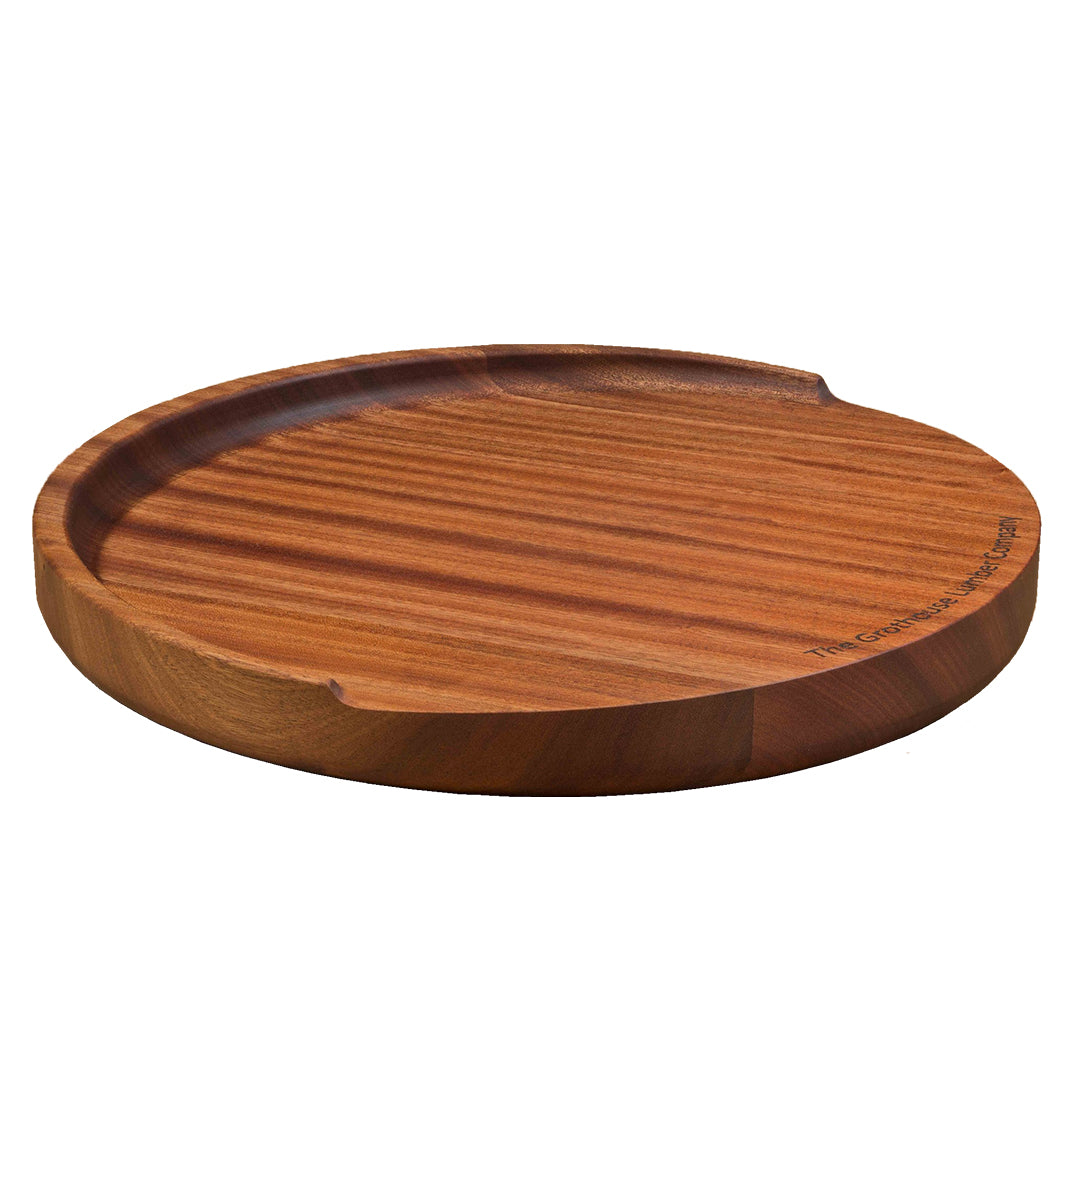 The Trencher Sapele Mahogany Round Wood Reversible Cutting Board